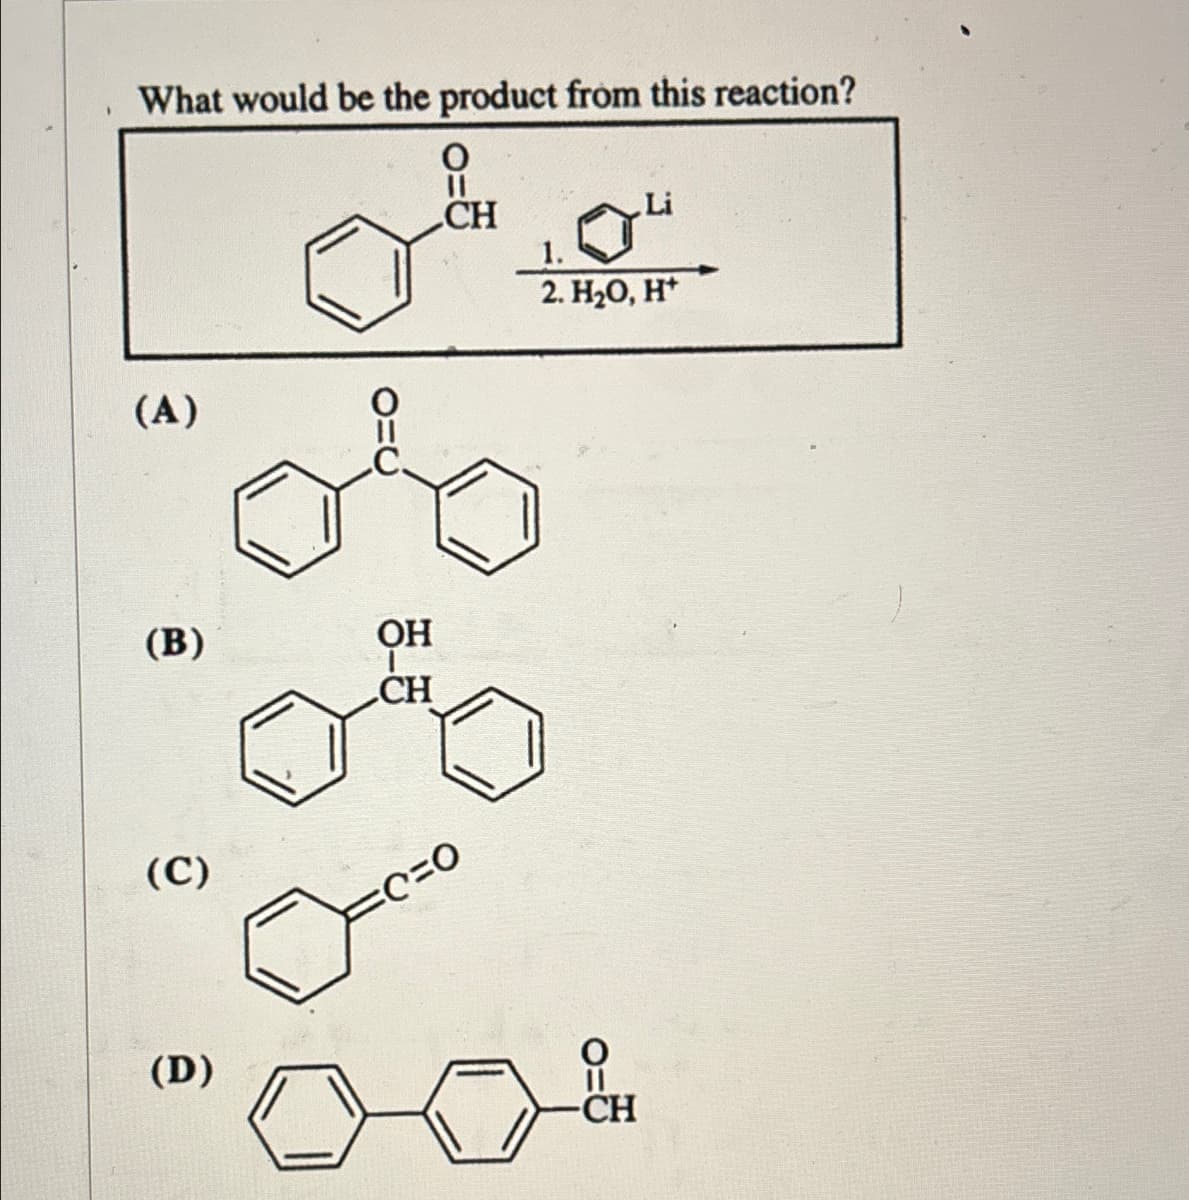 What would be the product from this reaction?
||
CH
(A)
(B)
(C)
(D)
O=C
do
OH
CH
C=O
1.
2. H₂O, H+
Li
-CH